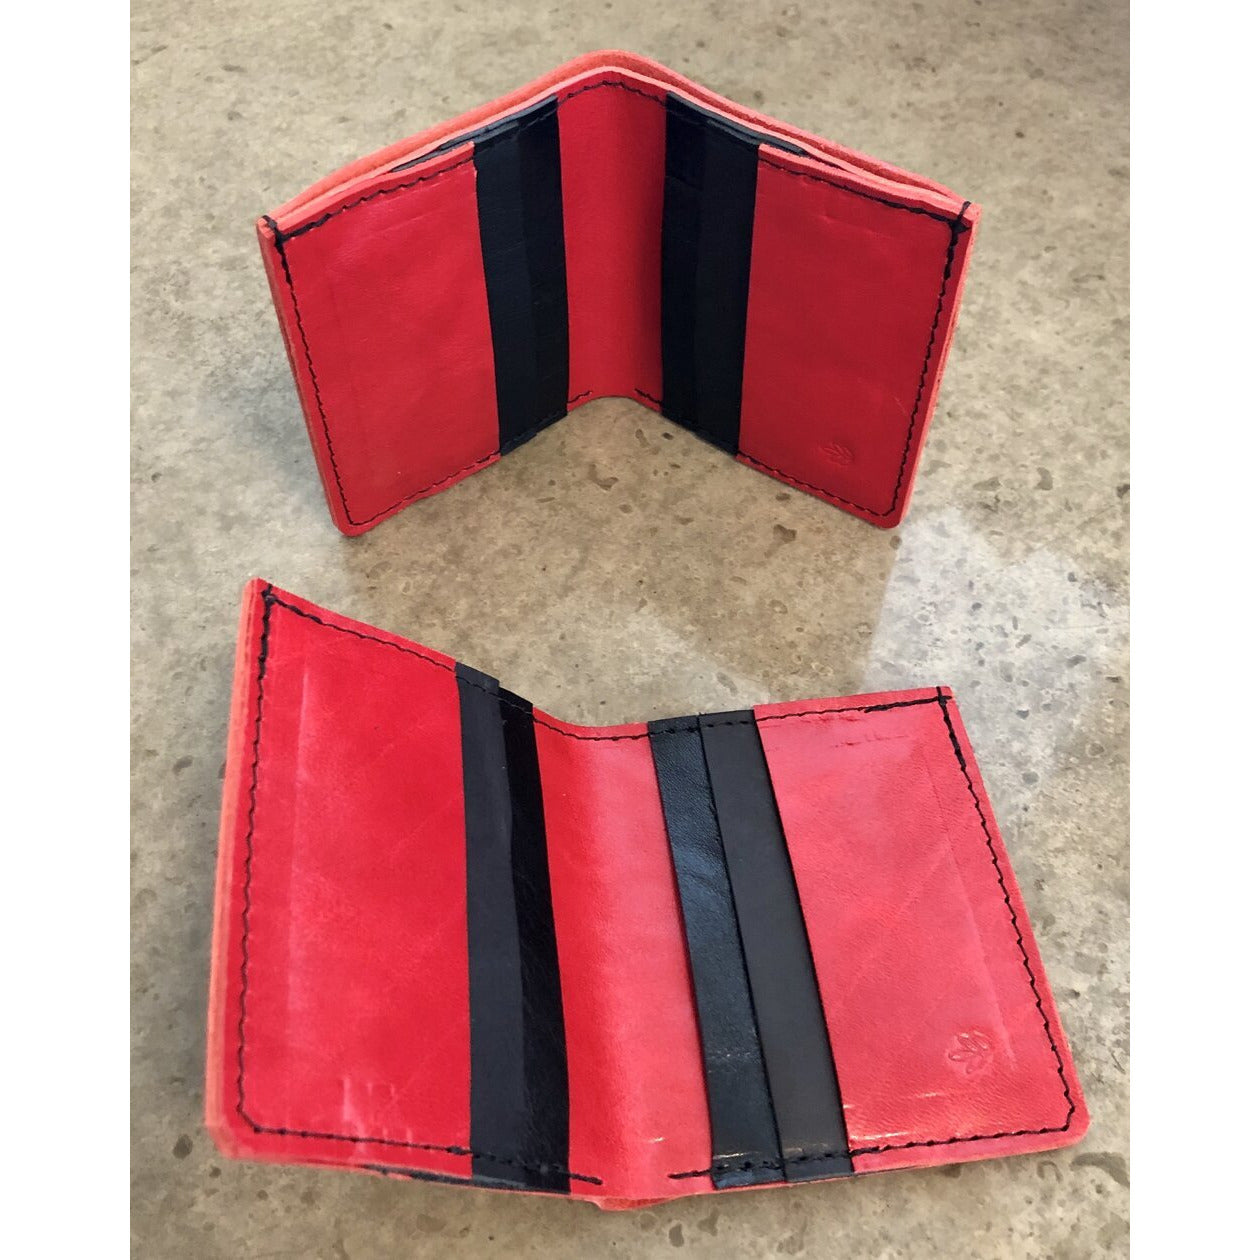 6 Pocket Leather Billfold in Red and Black